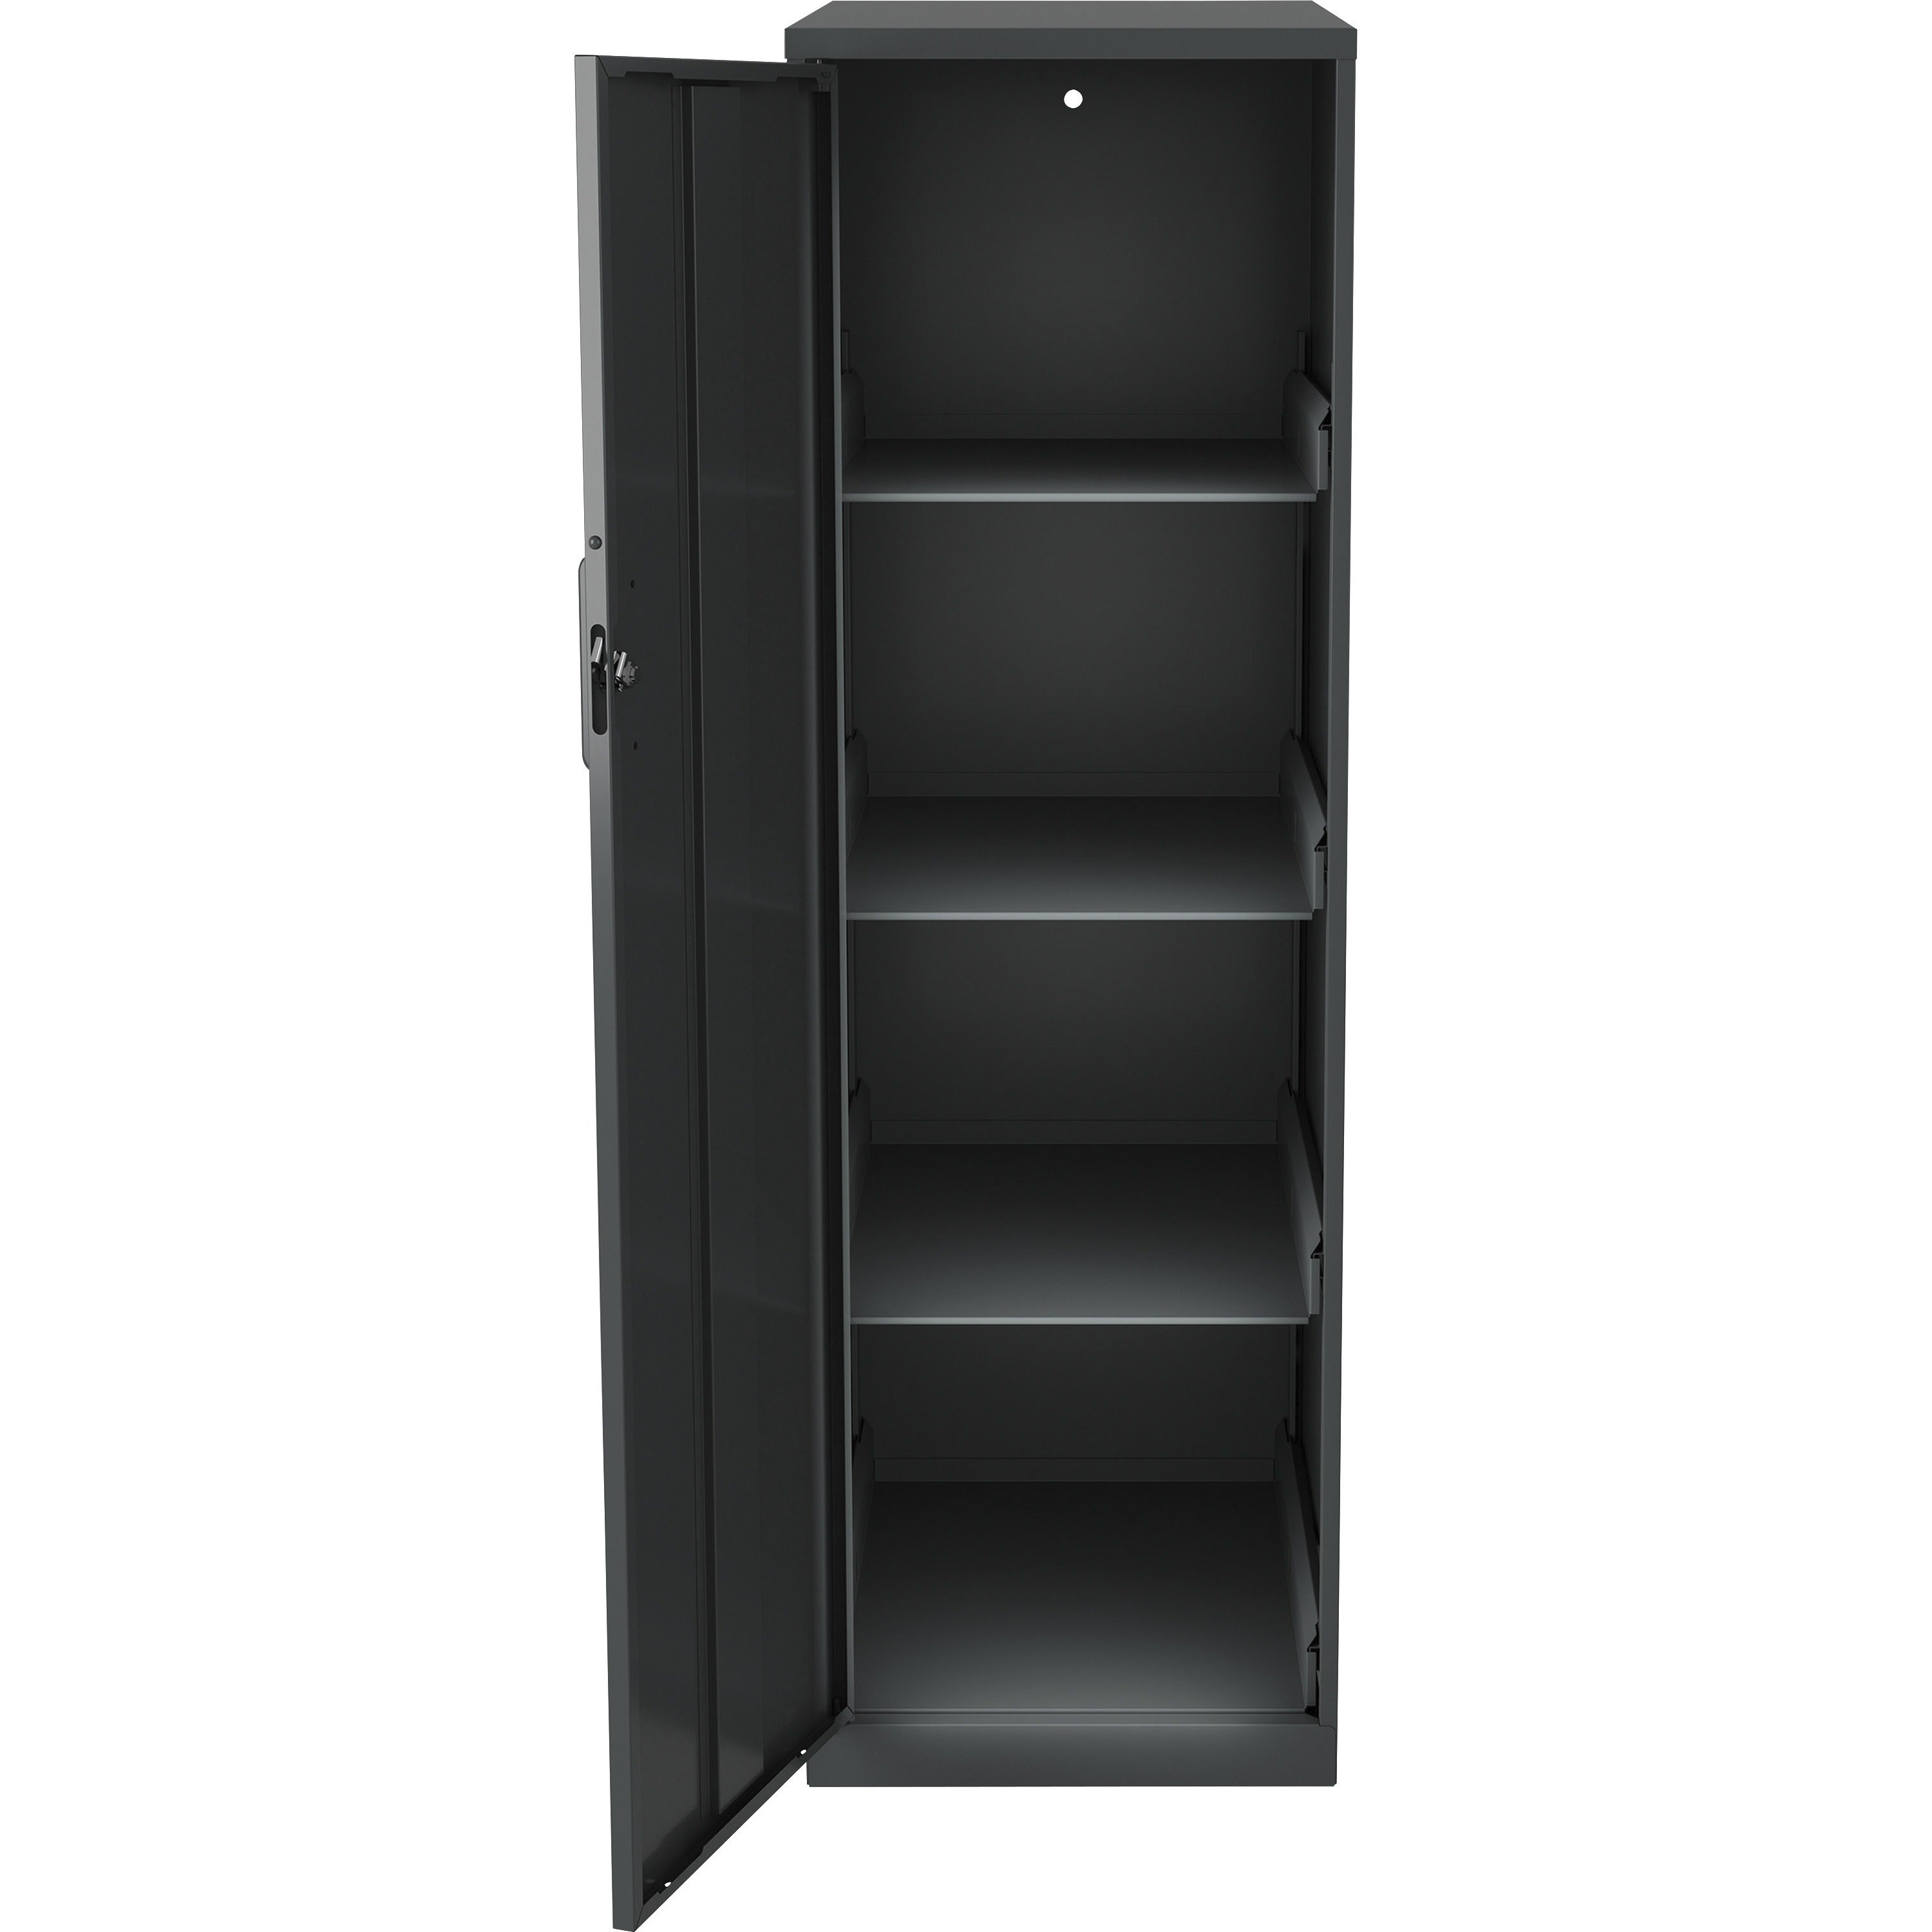 nusparc-personal-storage-cabinet-18-x-142-x-464-4-x-shelfves-hinged-doors-sturdy-durable-welded-eco-friendly-nonporous-surface-locking-mechanism-ventilated-locking-door-graphite-steel-recycled-taa-compliant_nprsc418zzml - 2